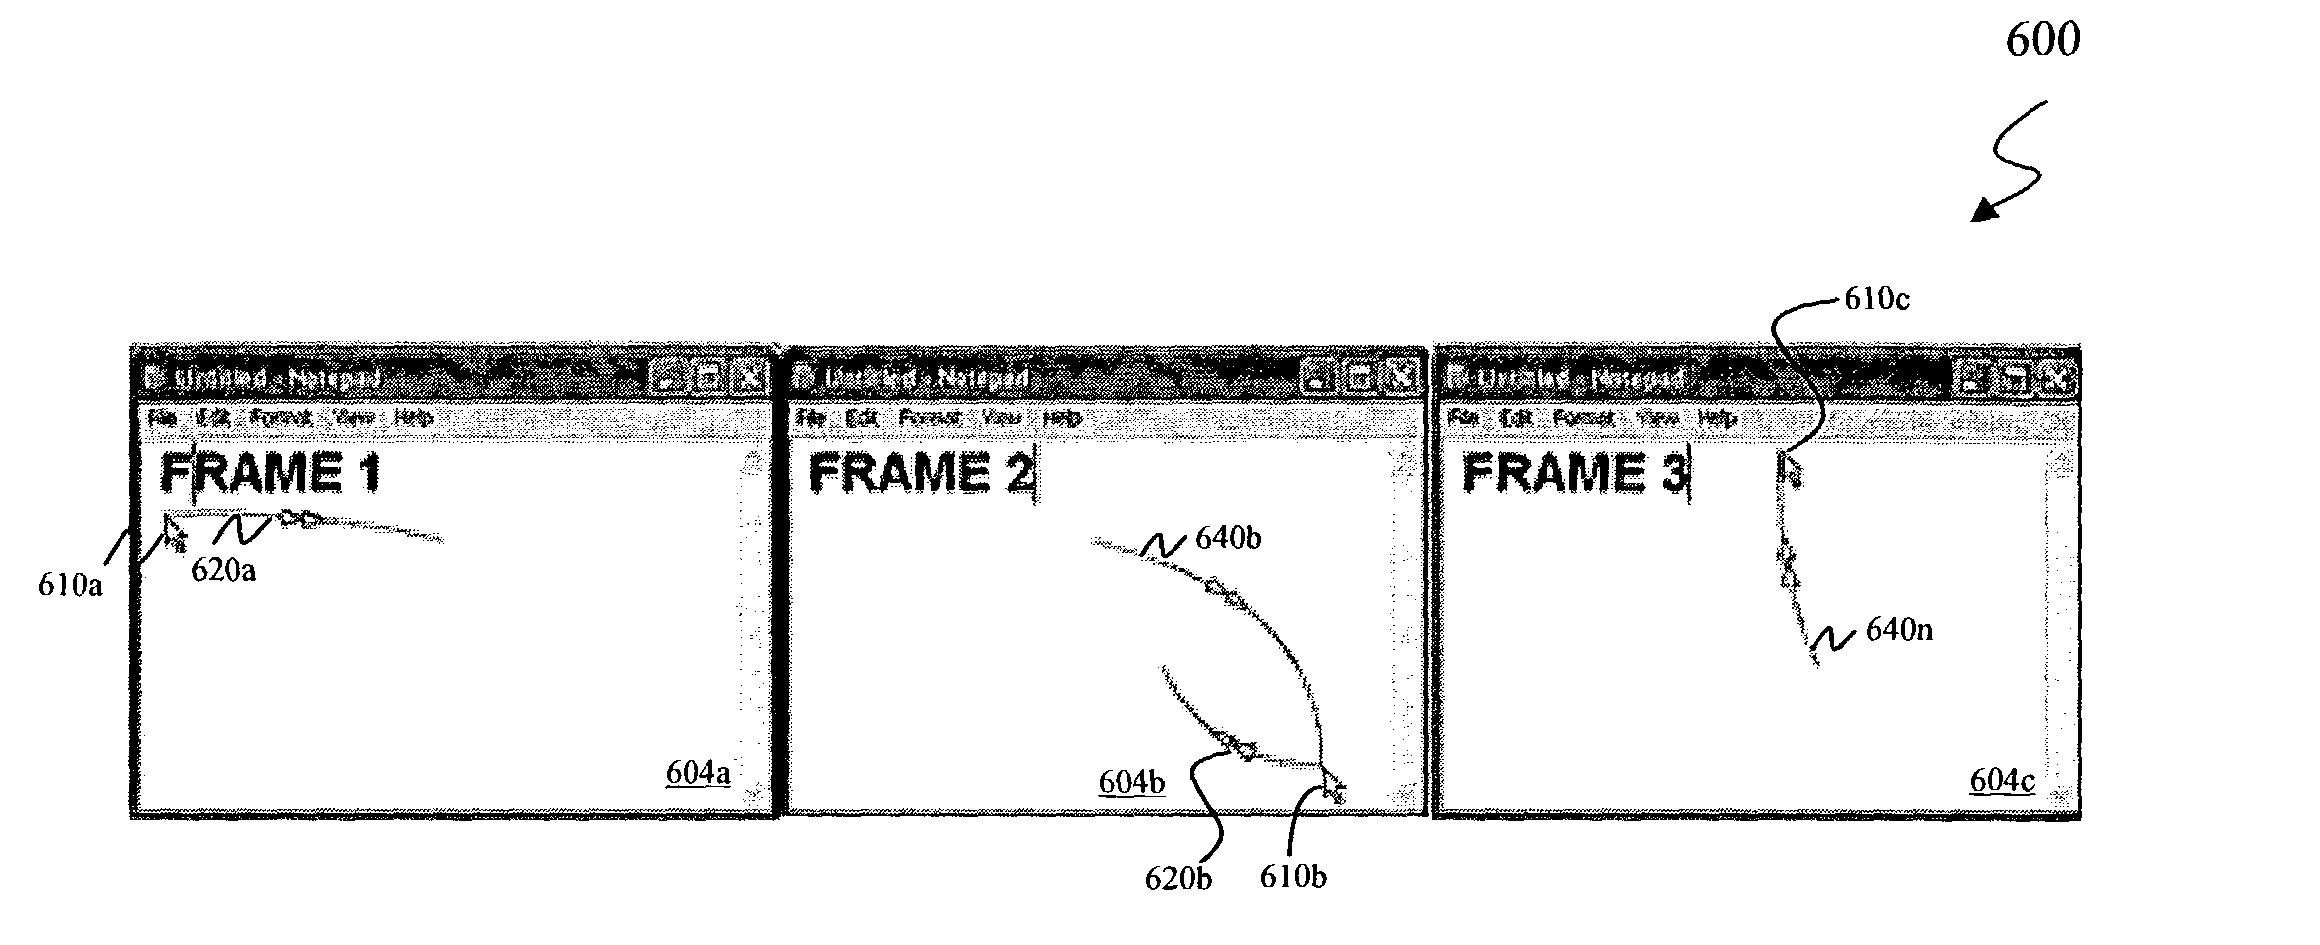 System and method for representation of object animation within presentations of software application programs